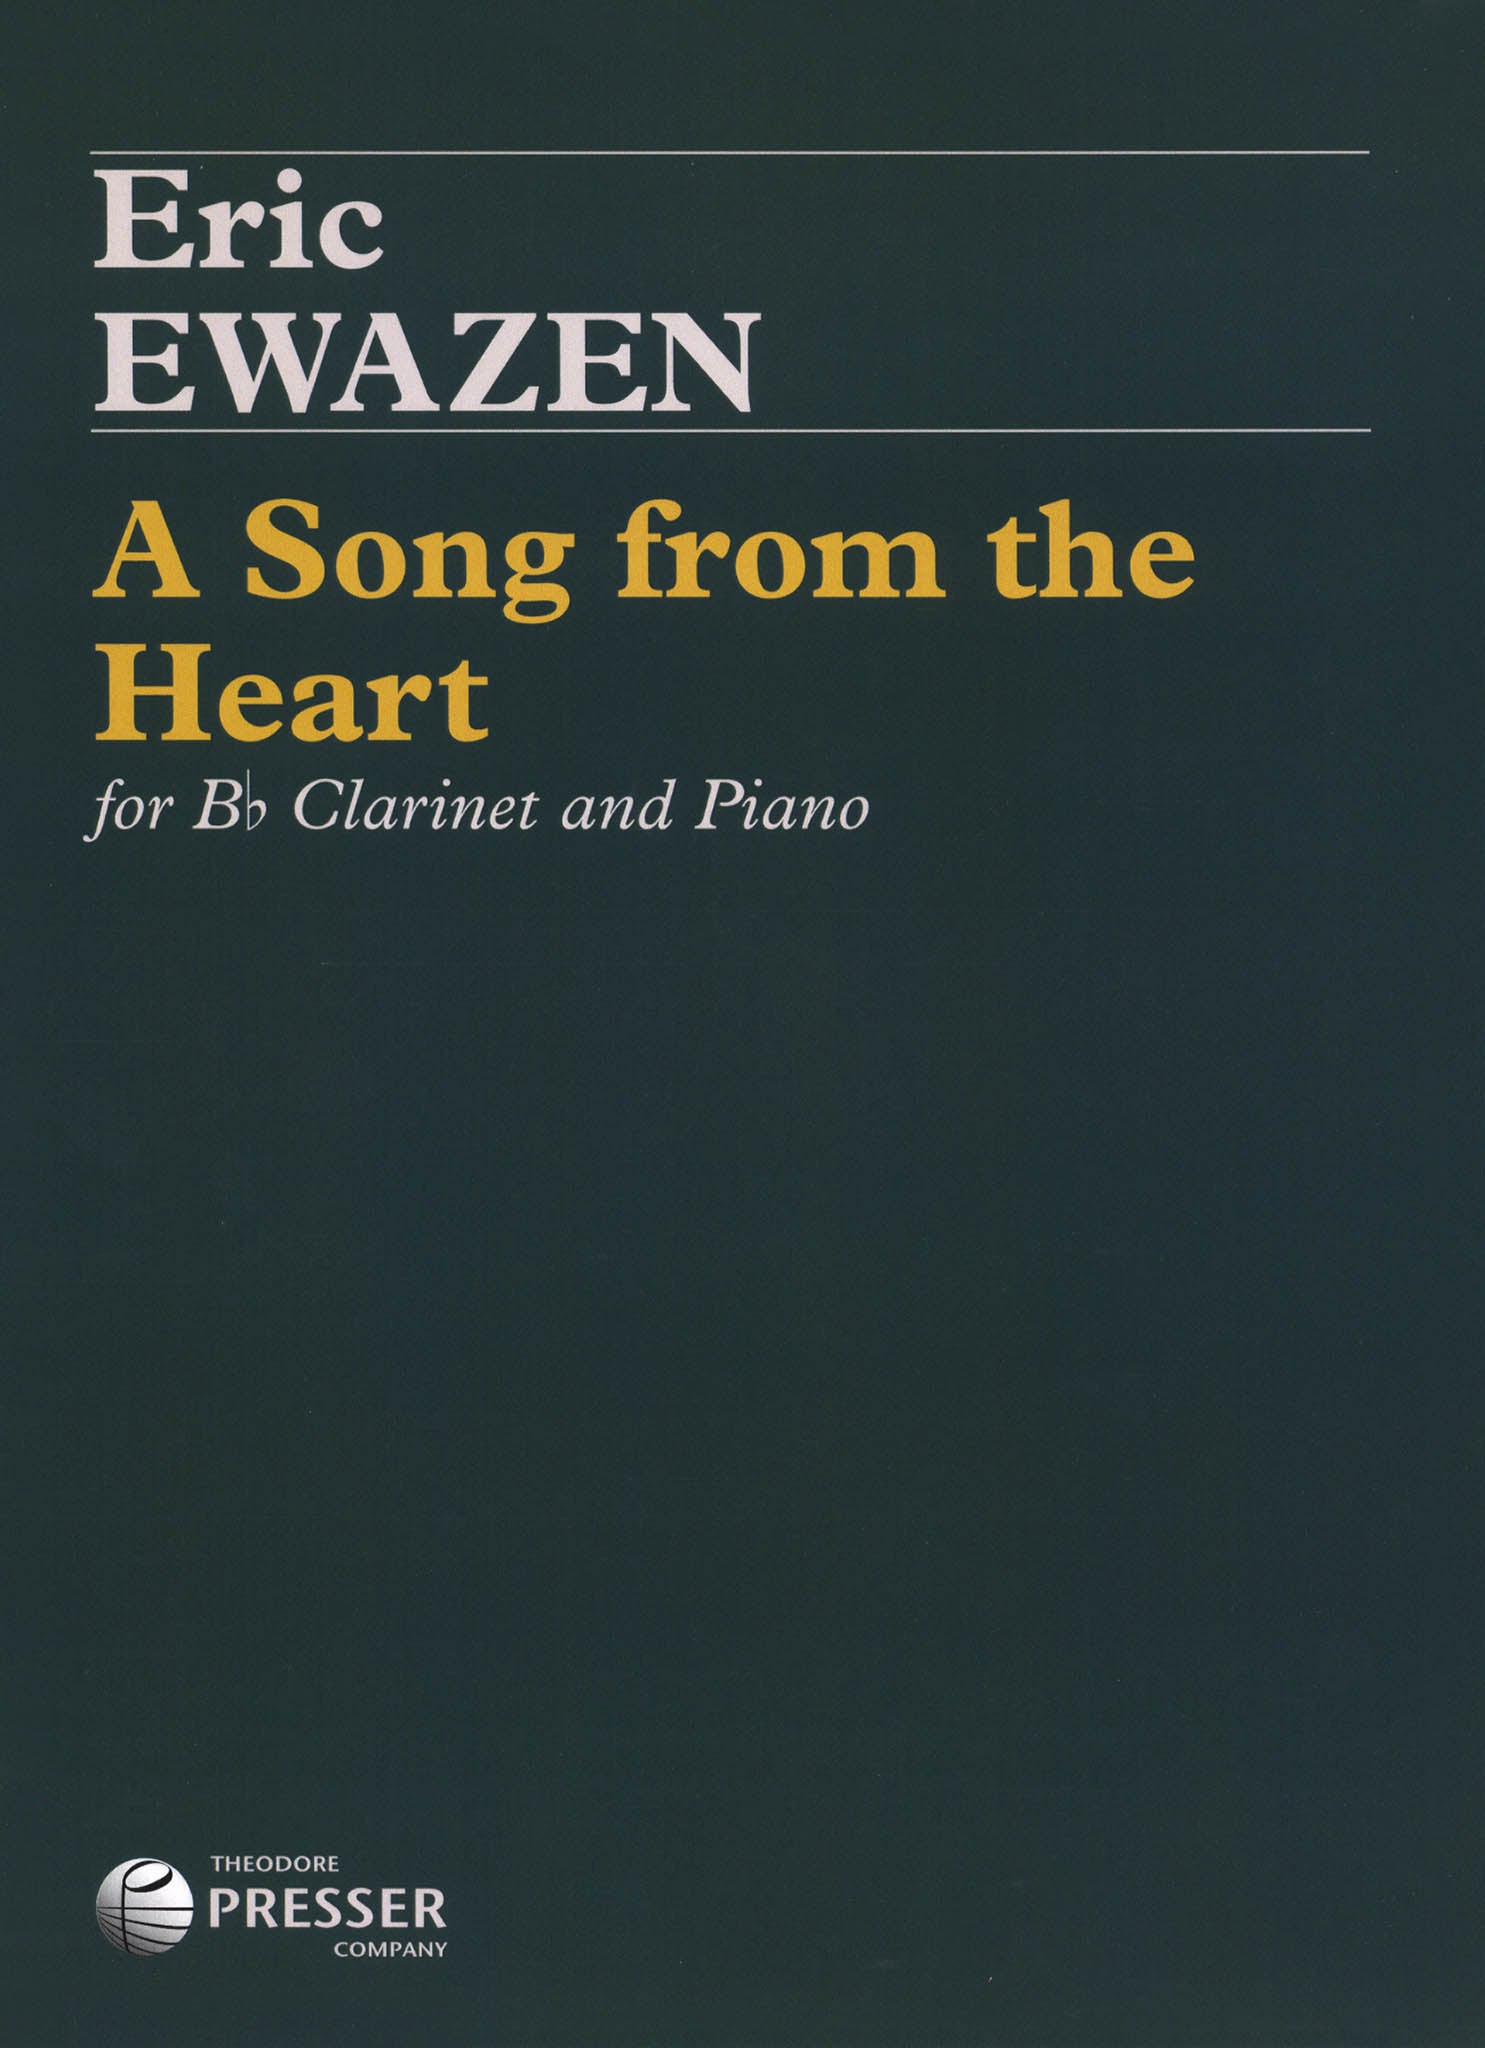 Eric Ewazen A Song from the Heart clarinet and piano cover